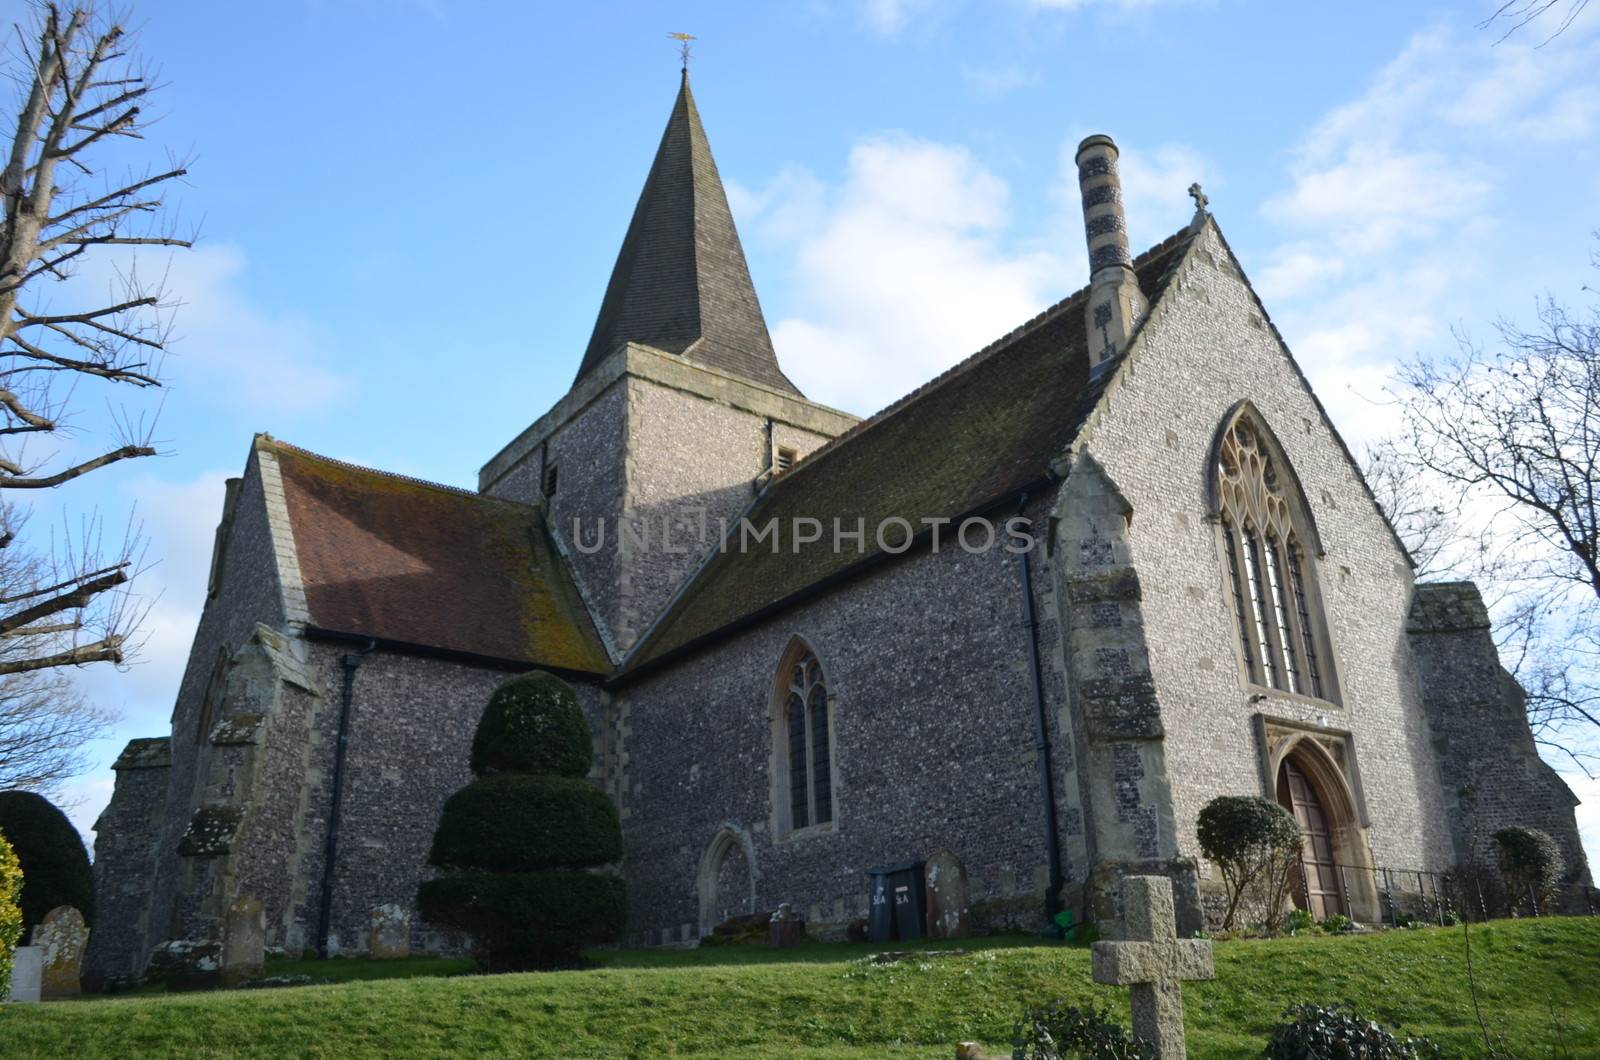 12th Century English church in the East Sussex village of Alfriston.